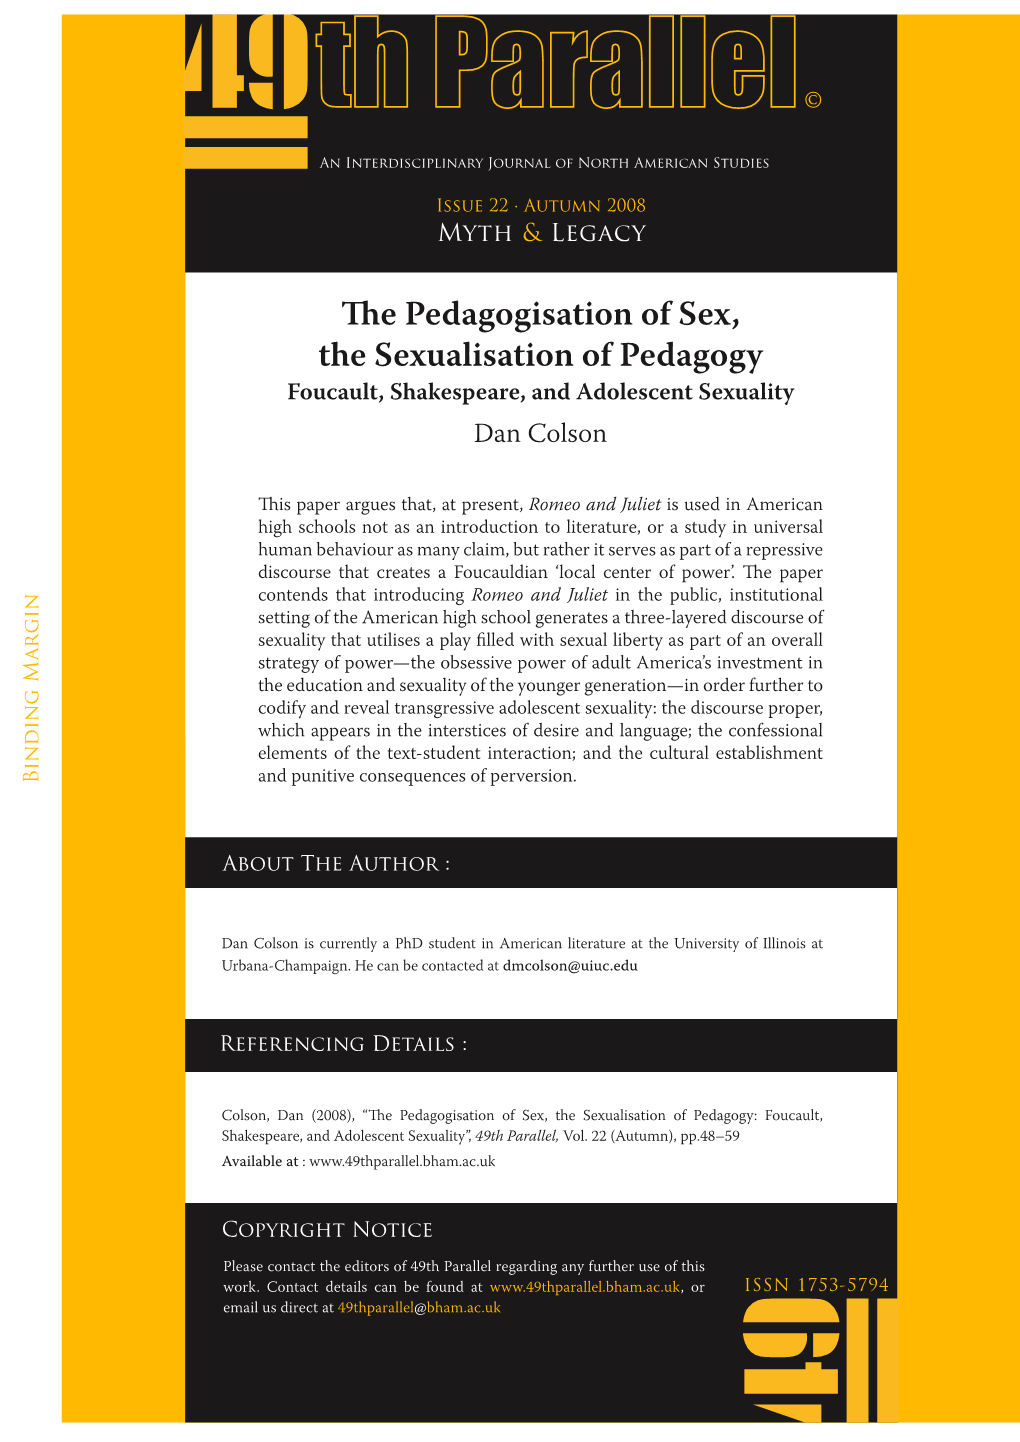 The Pedagogisation of Sex, the Sexualisation of Pedagogy Foucault, Shakespeare, and Adolescent Sexuality Dan Colson